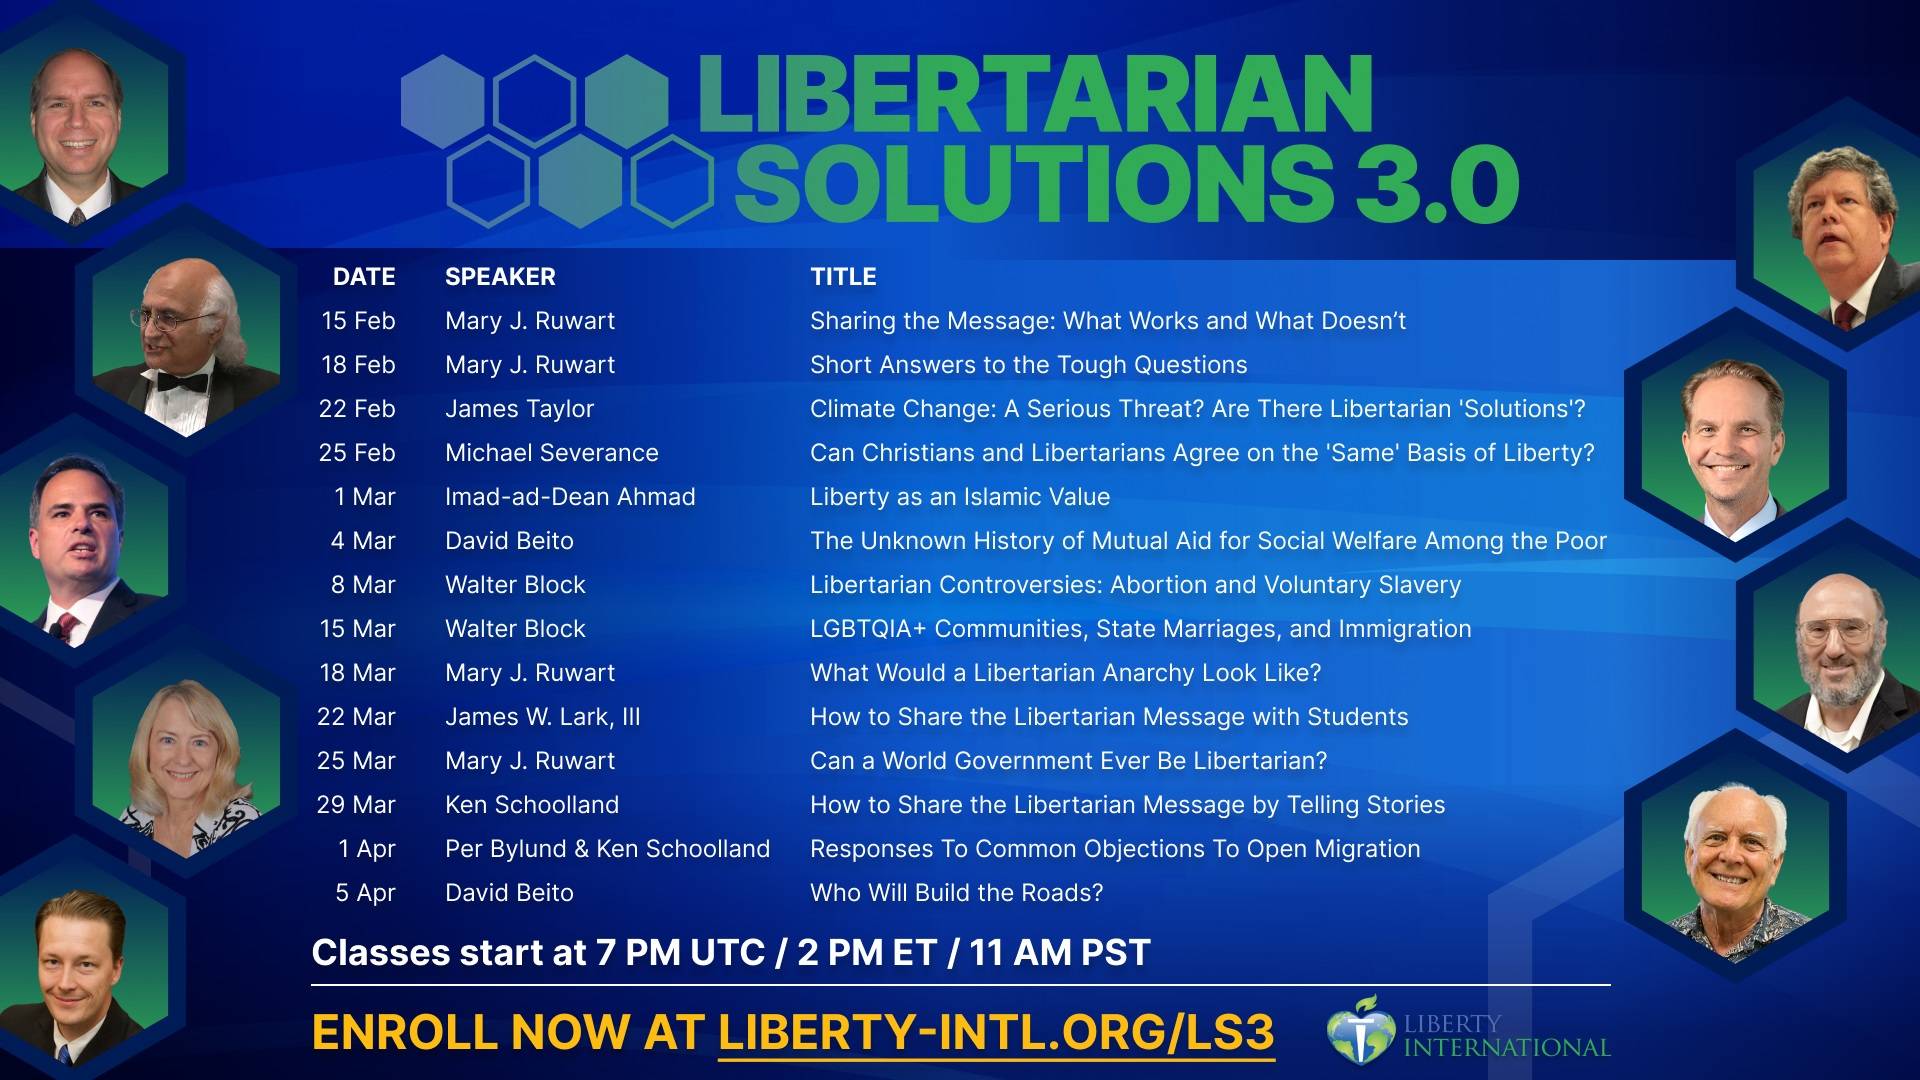 Libertarian Solutions 3.0 agenda is now finalized and ready for participants!